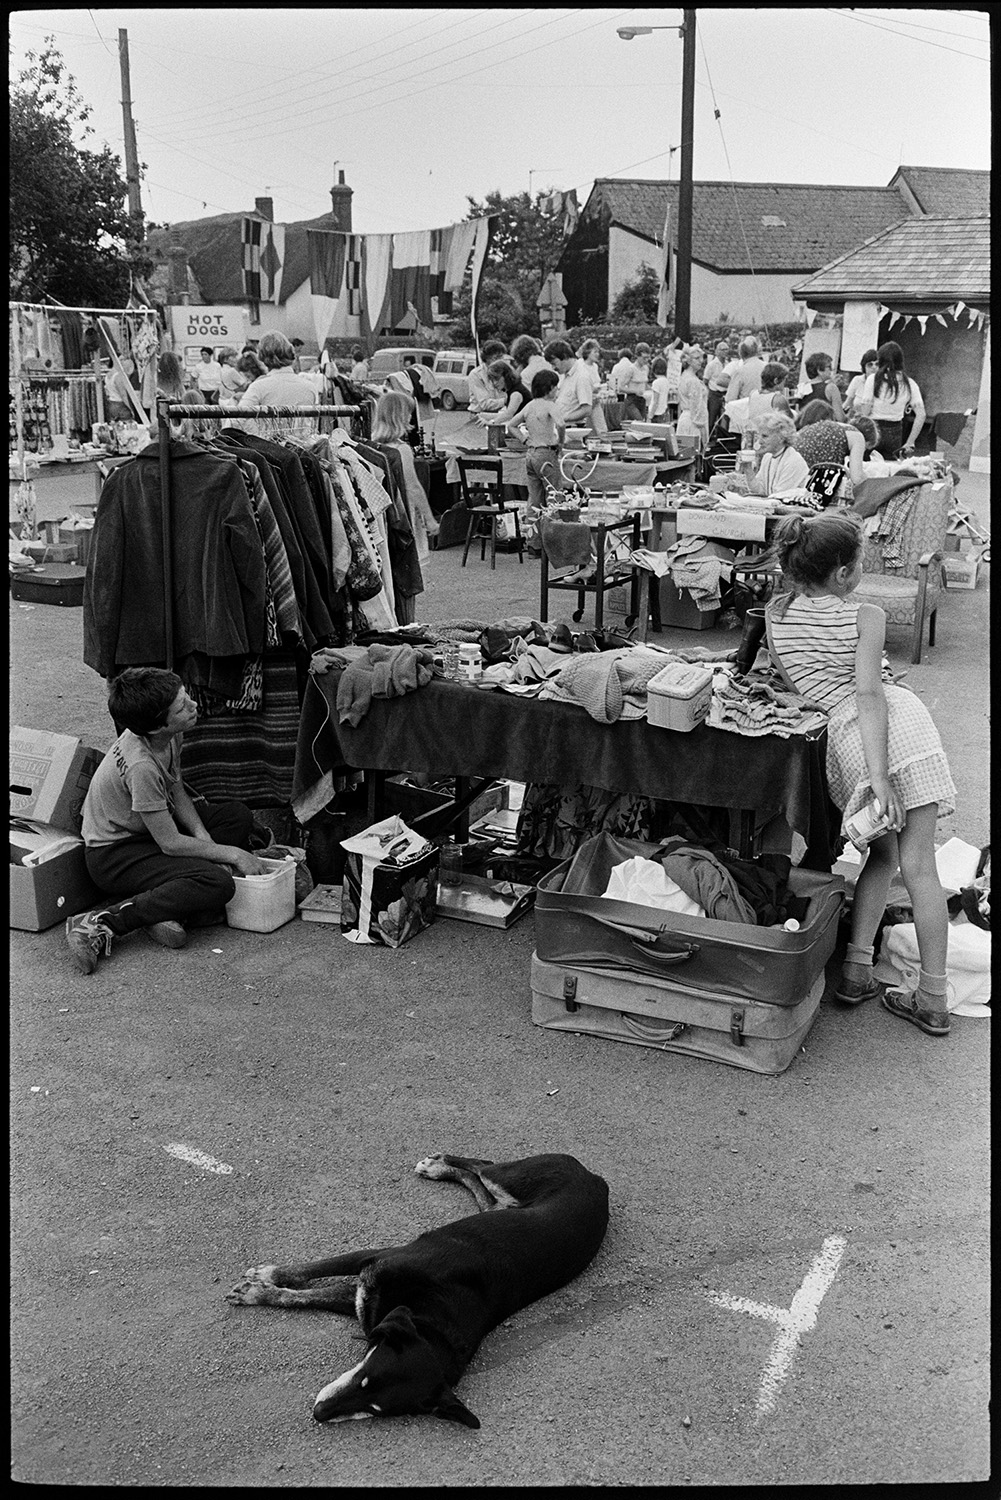 Open air market, village square part of festival, stalls, flags, crafts. 
[A dog lying on the ground by a stall selling clothes at Dolton Festival or open air market. Two children are running the stall. Other stalls are visible in the background and the street is decorated with flags.]